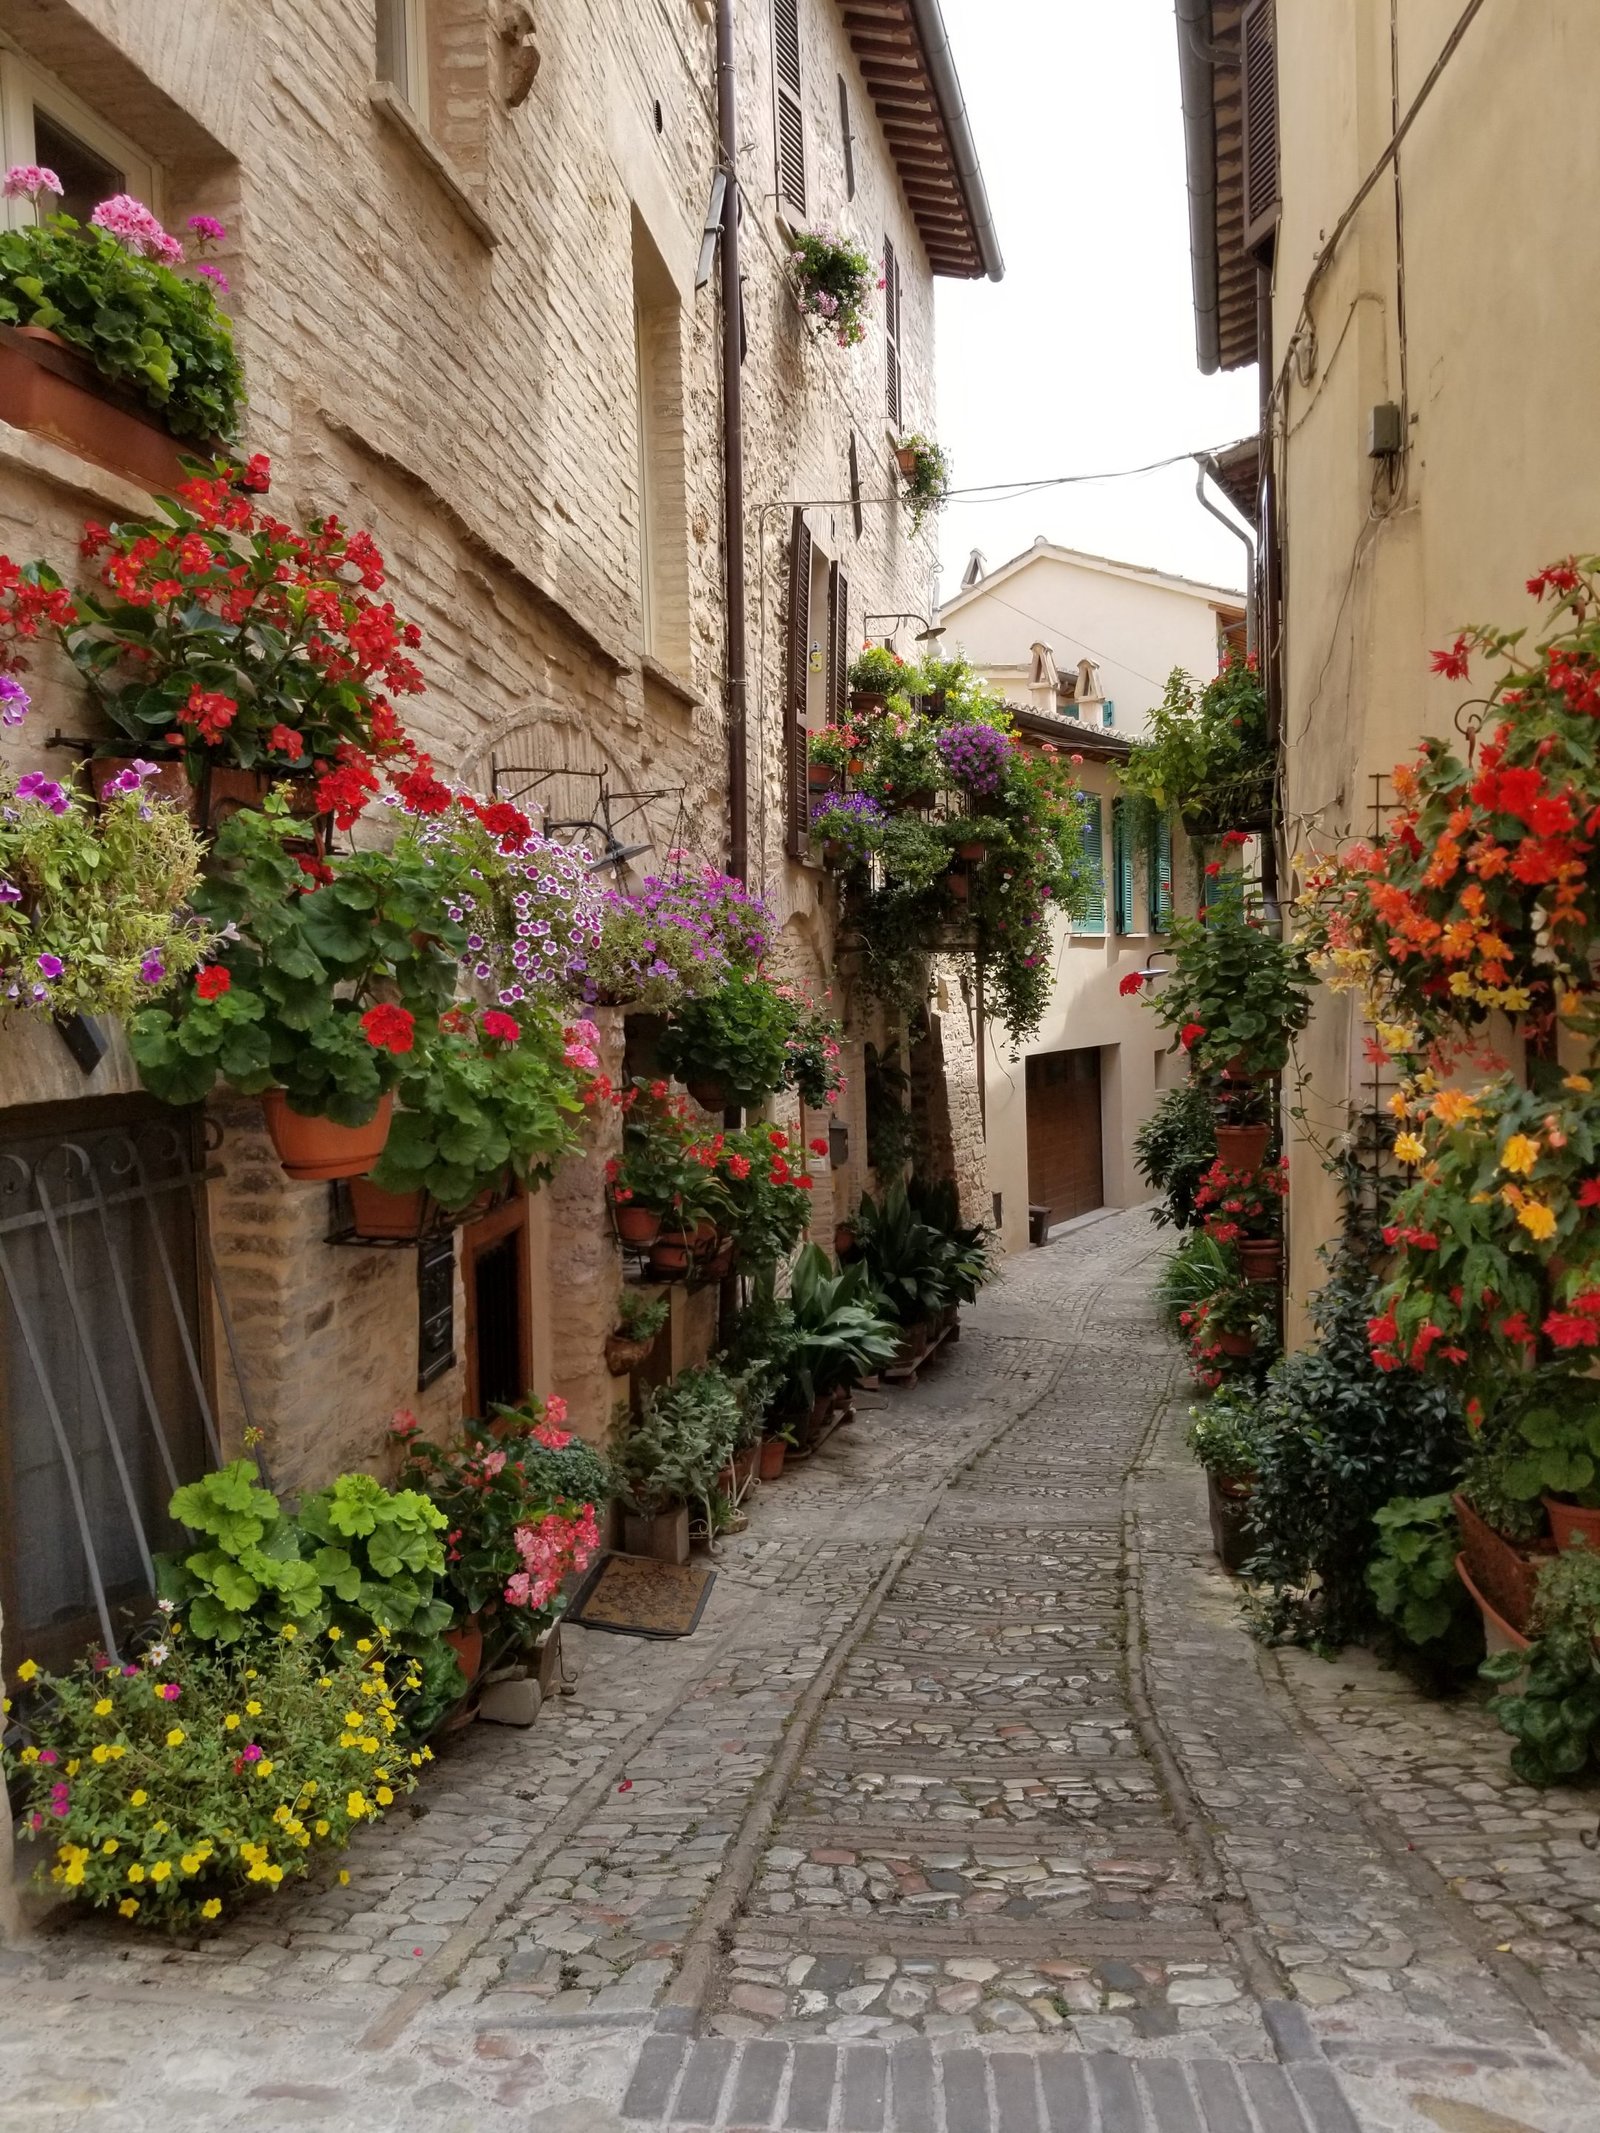 Spello is one of the most beautiful towns in Italy. The flower balconies and streets are a photographers dream. Corpus Domini, https://www.ouritalianjourney.com/spello-one-of-the-most-beautiful-towns-in-italy